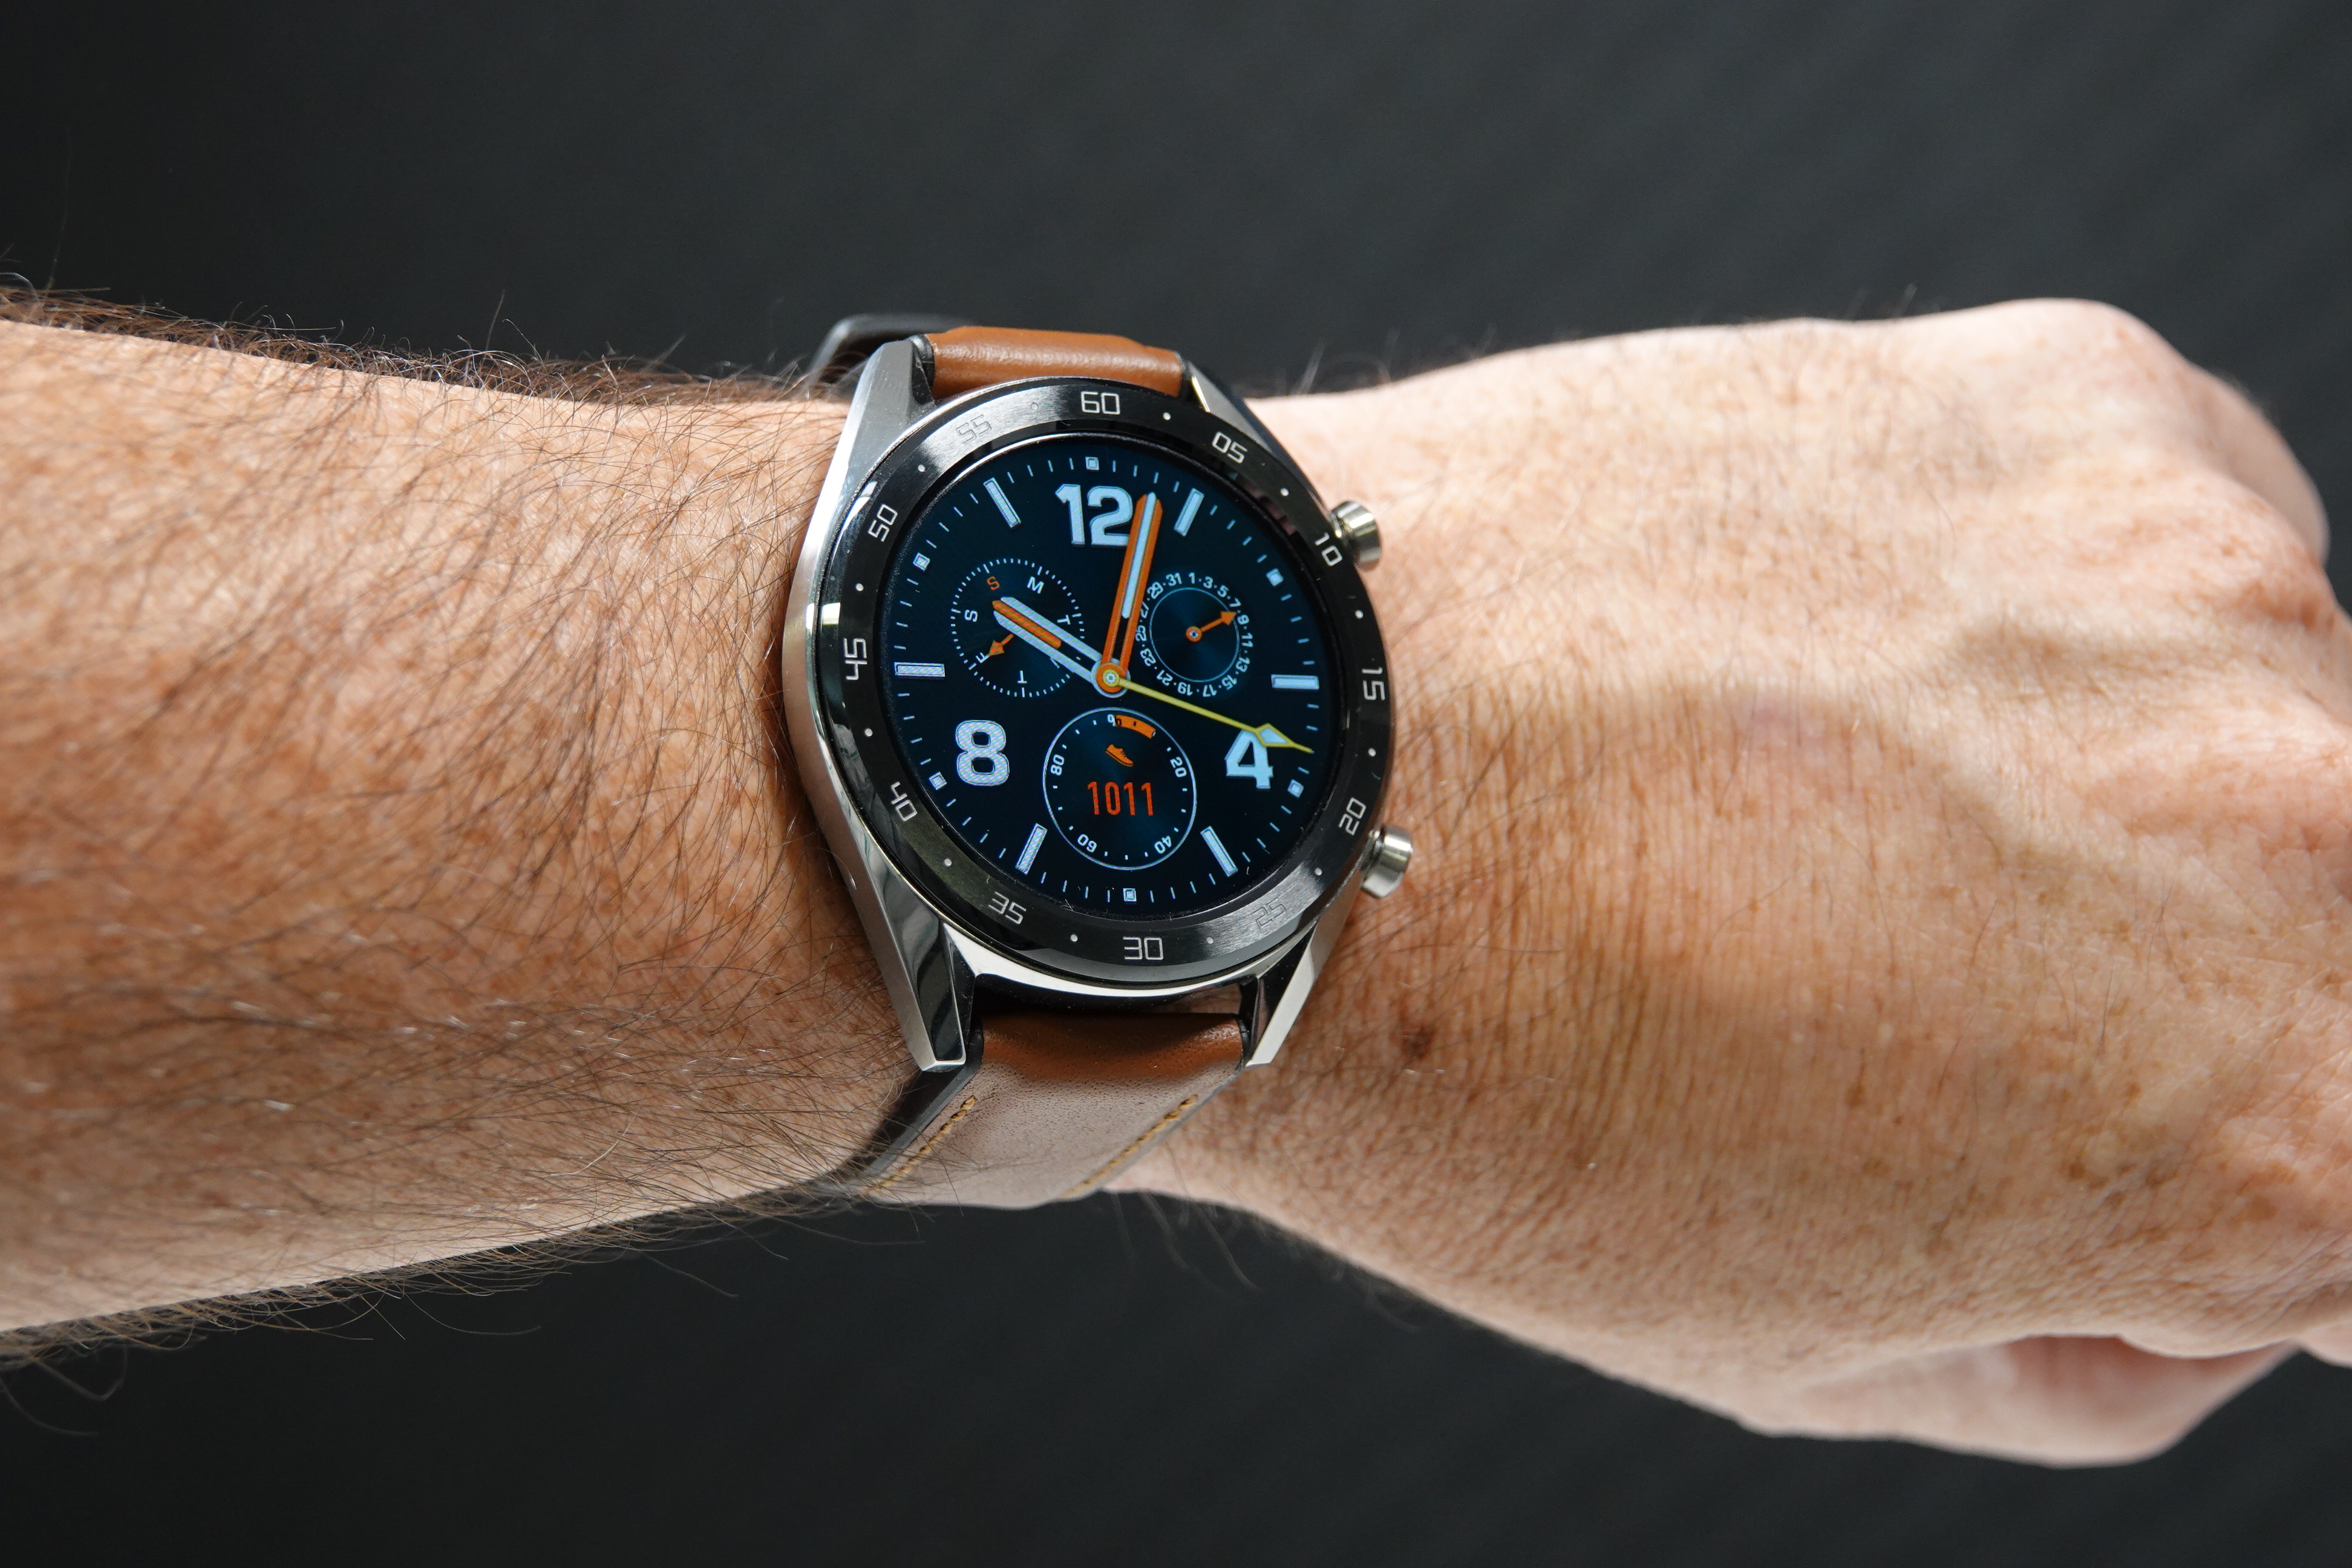 Huawei Watch Gt Review 7 Day Battery The Best Free Smartwatch You Can Get Eftm